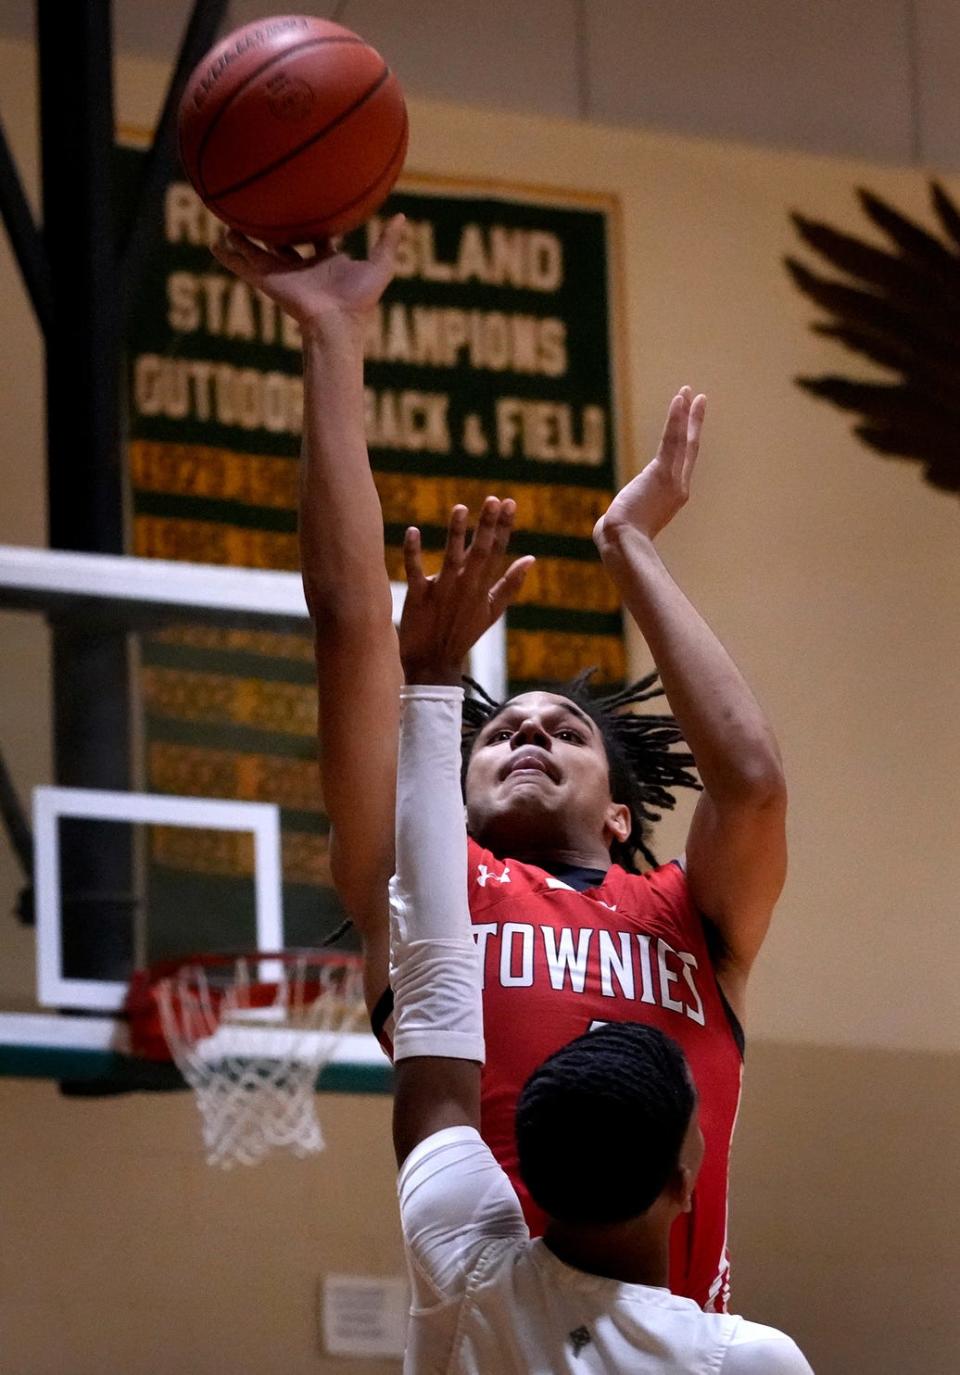 The Townies will face the winner of Friday's Hendricken vs. Westerly matchup.